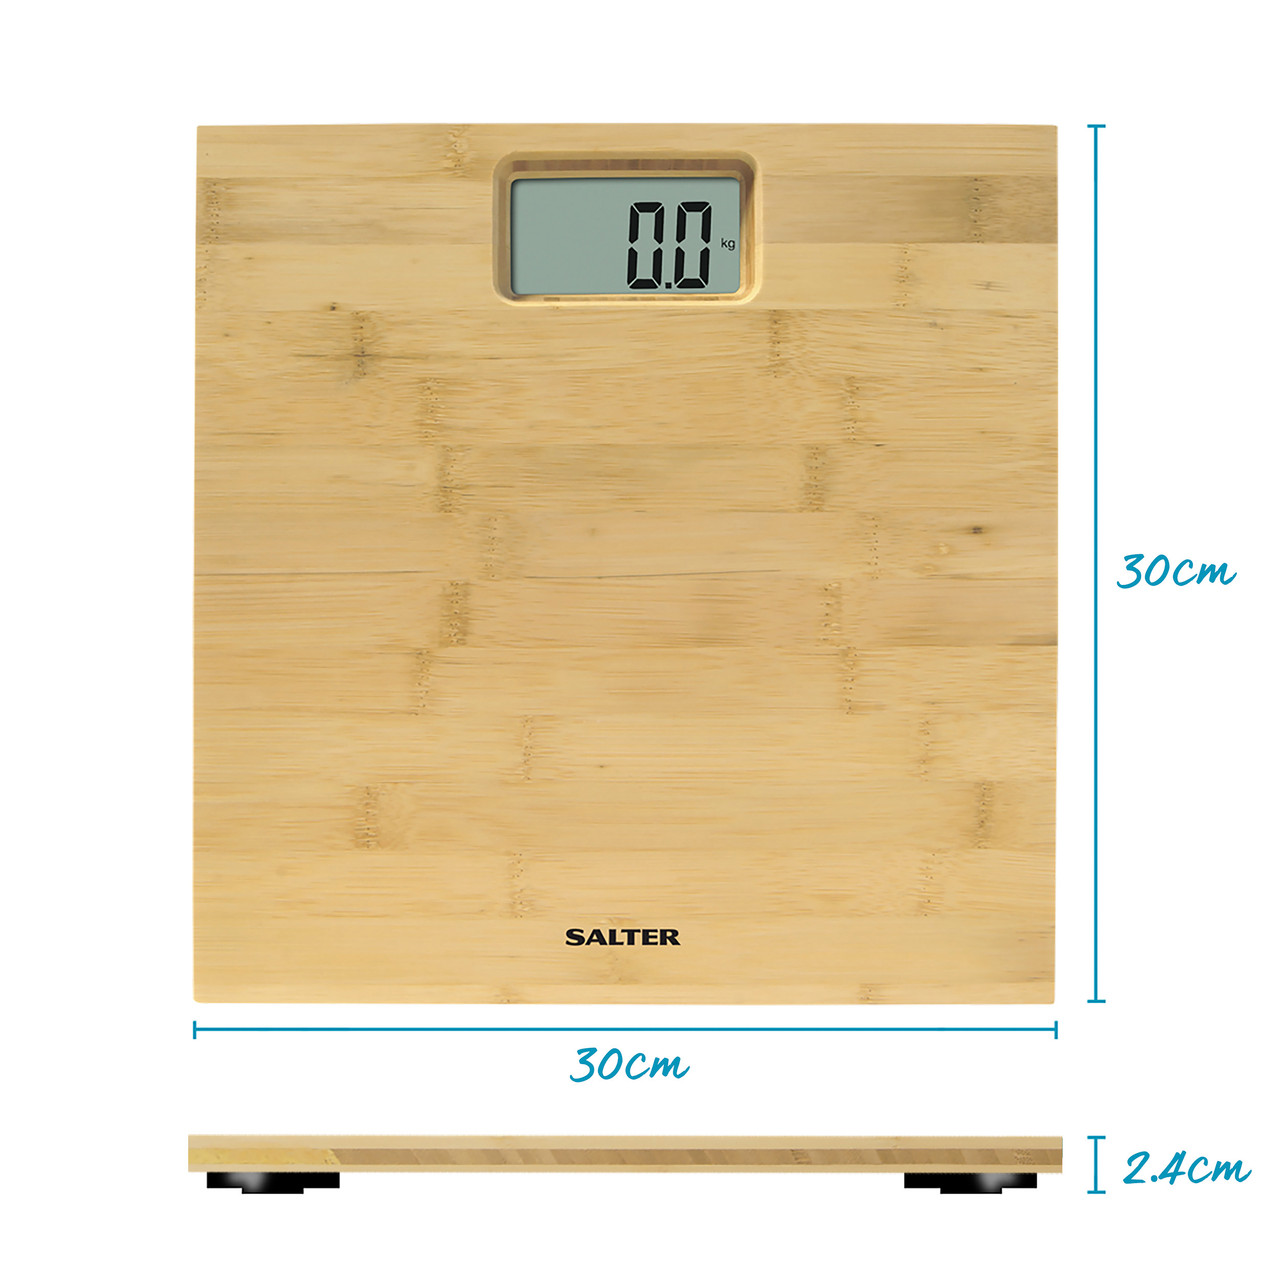 Bamboo Bathroom Scale with Backlight – ToiletTree Products